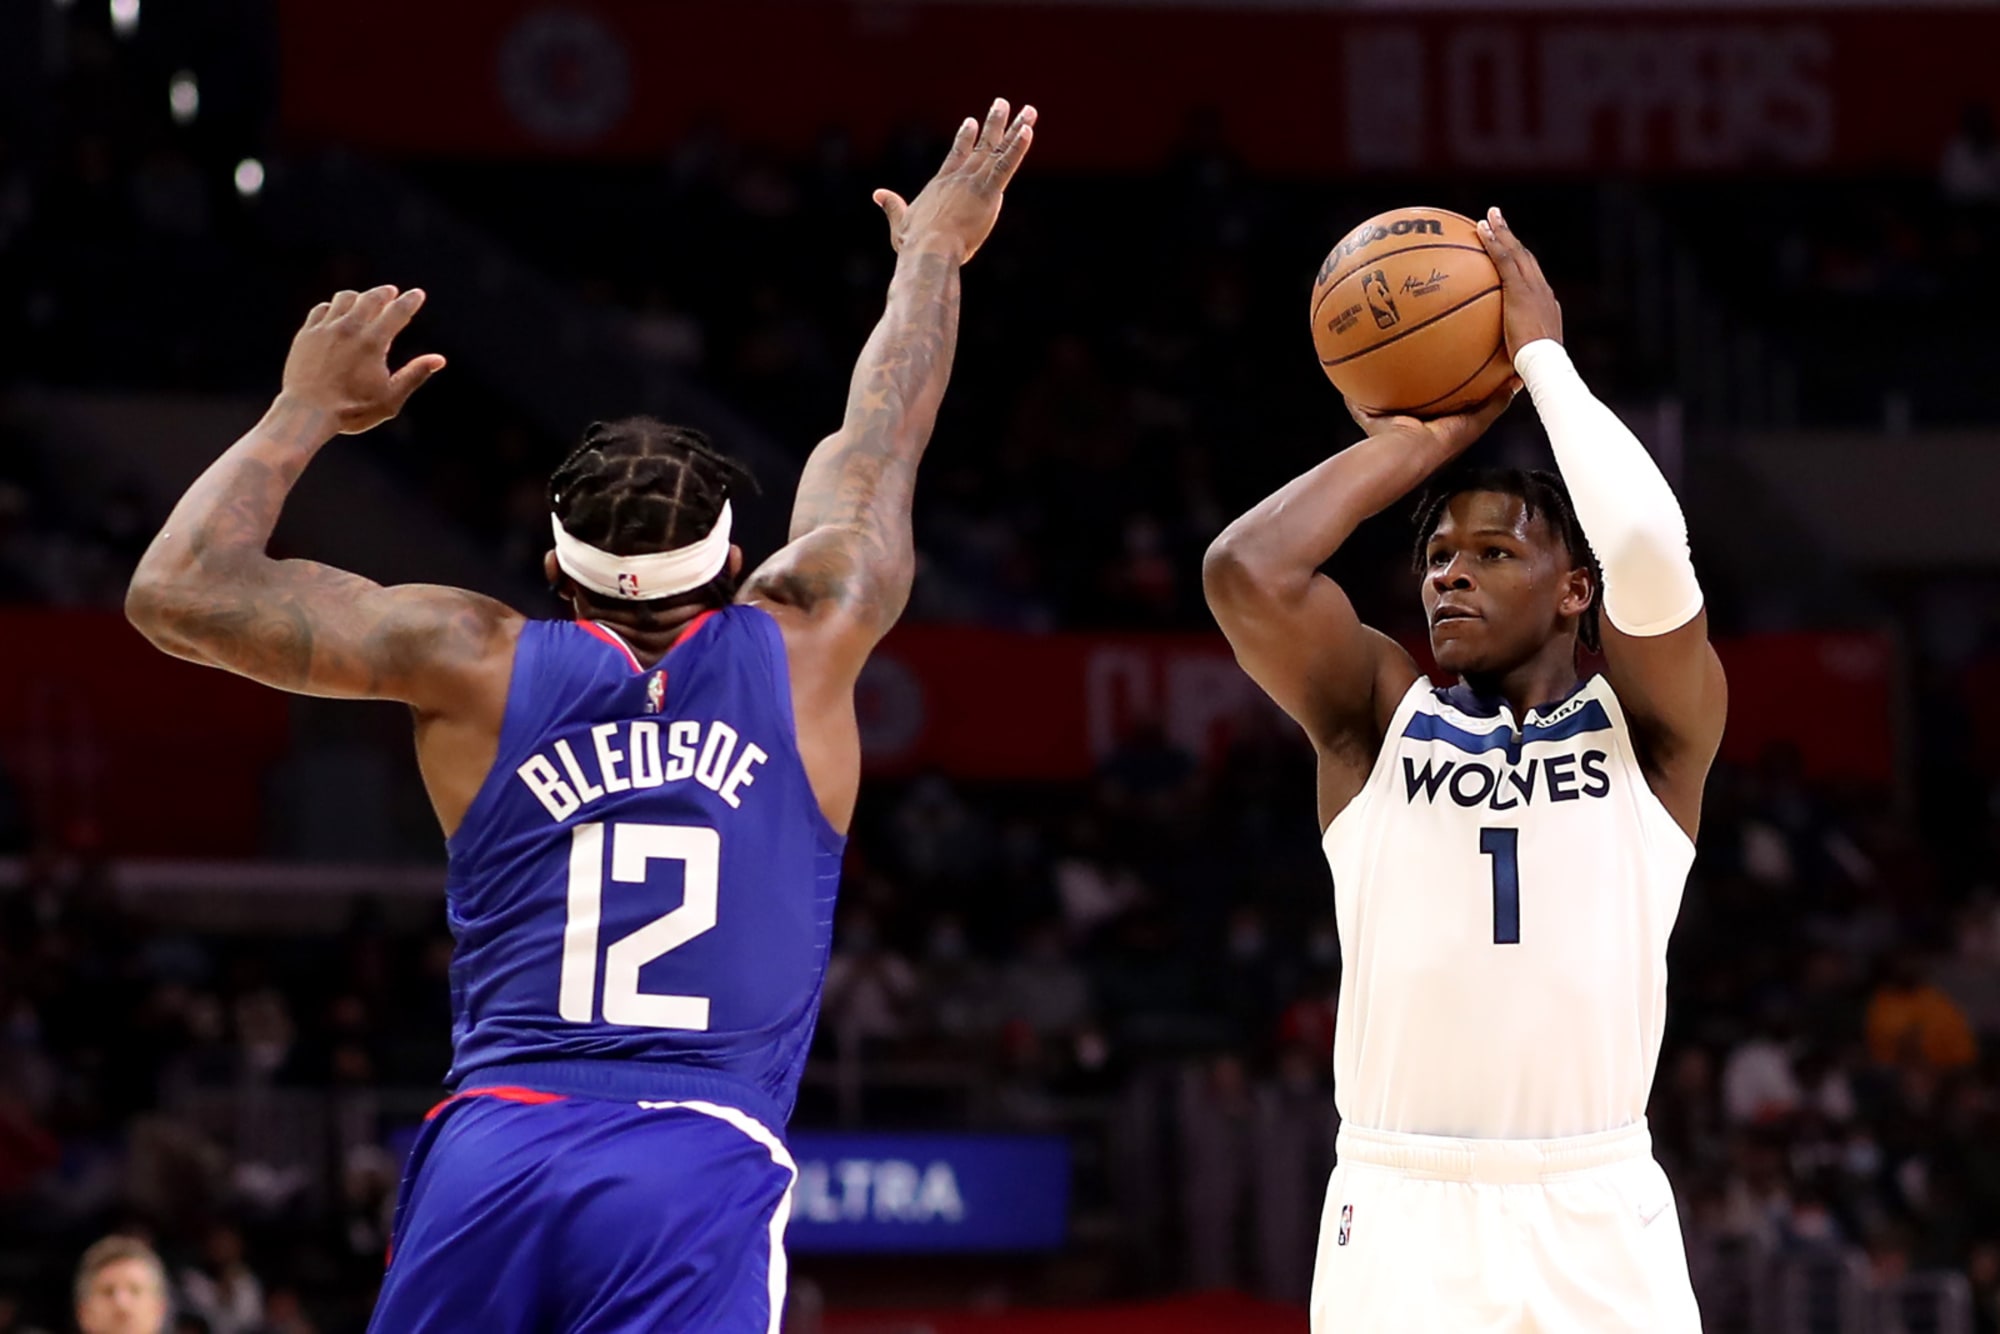 NBA: Game Preview #69: Edwards, Wolves to Visit Young, Murray and